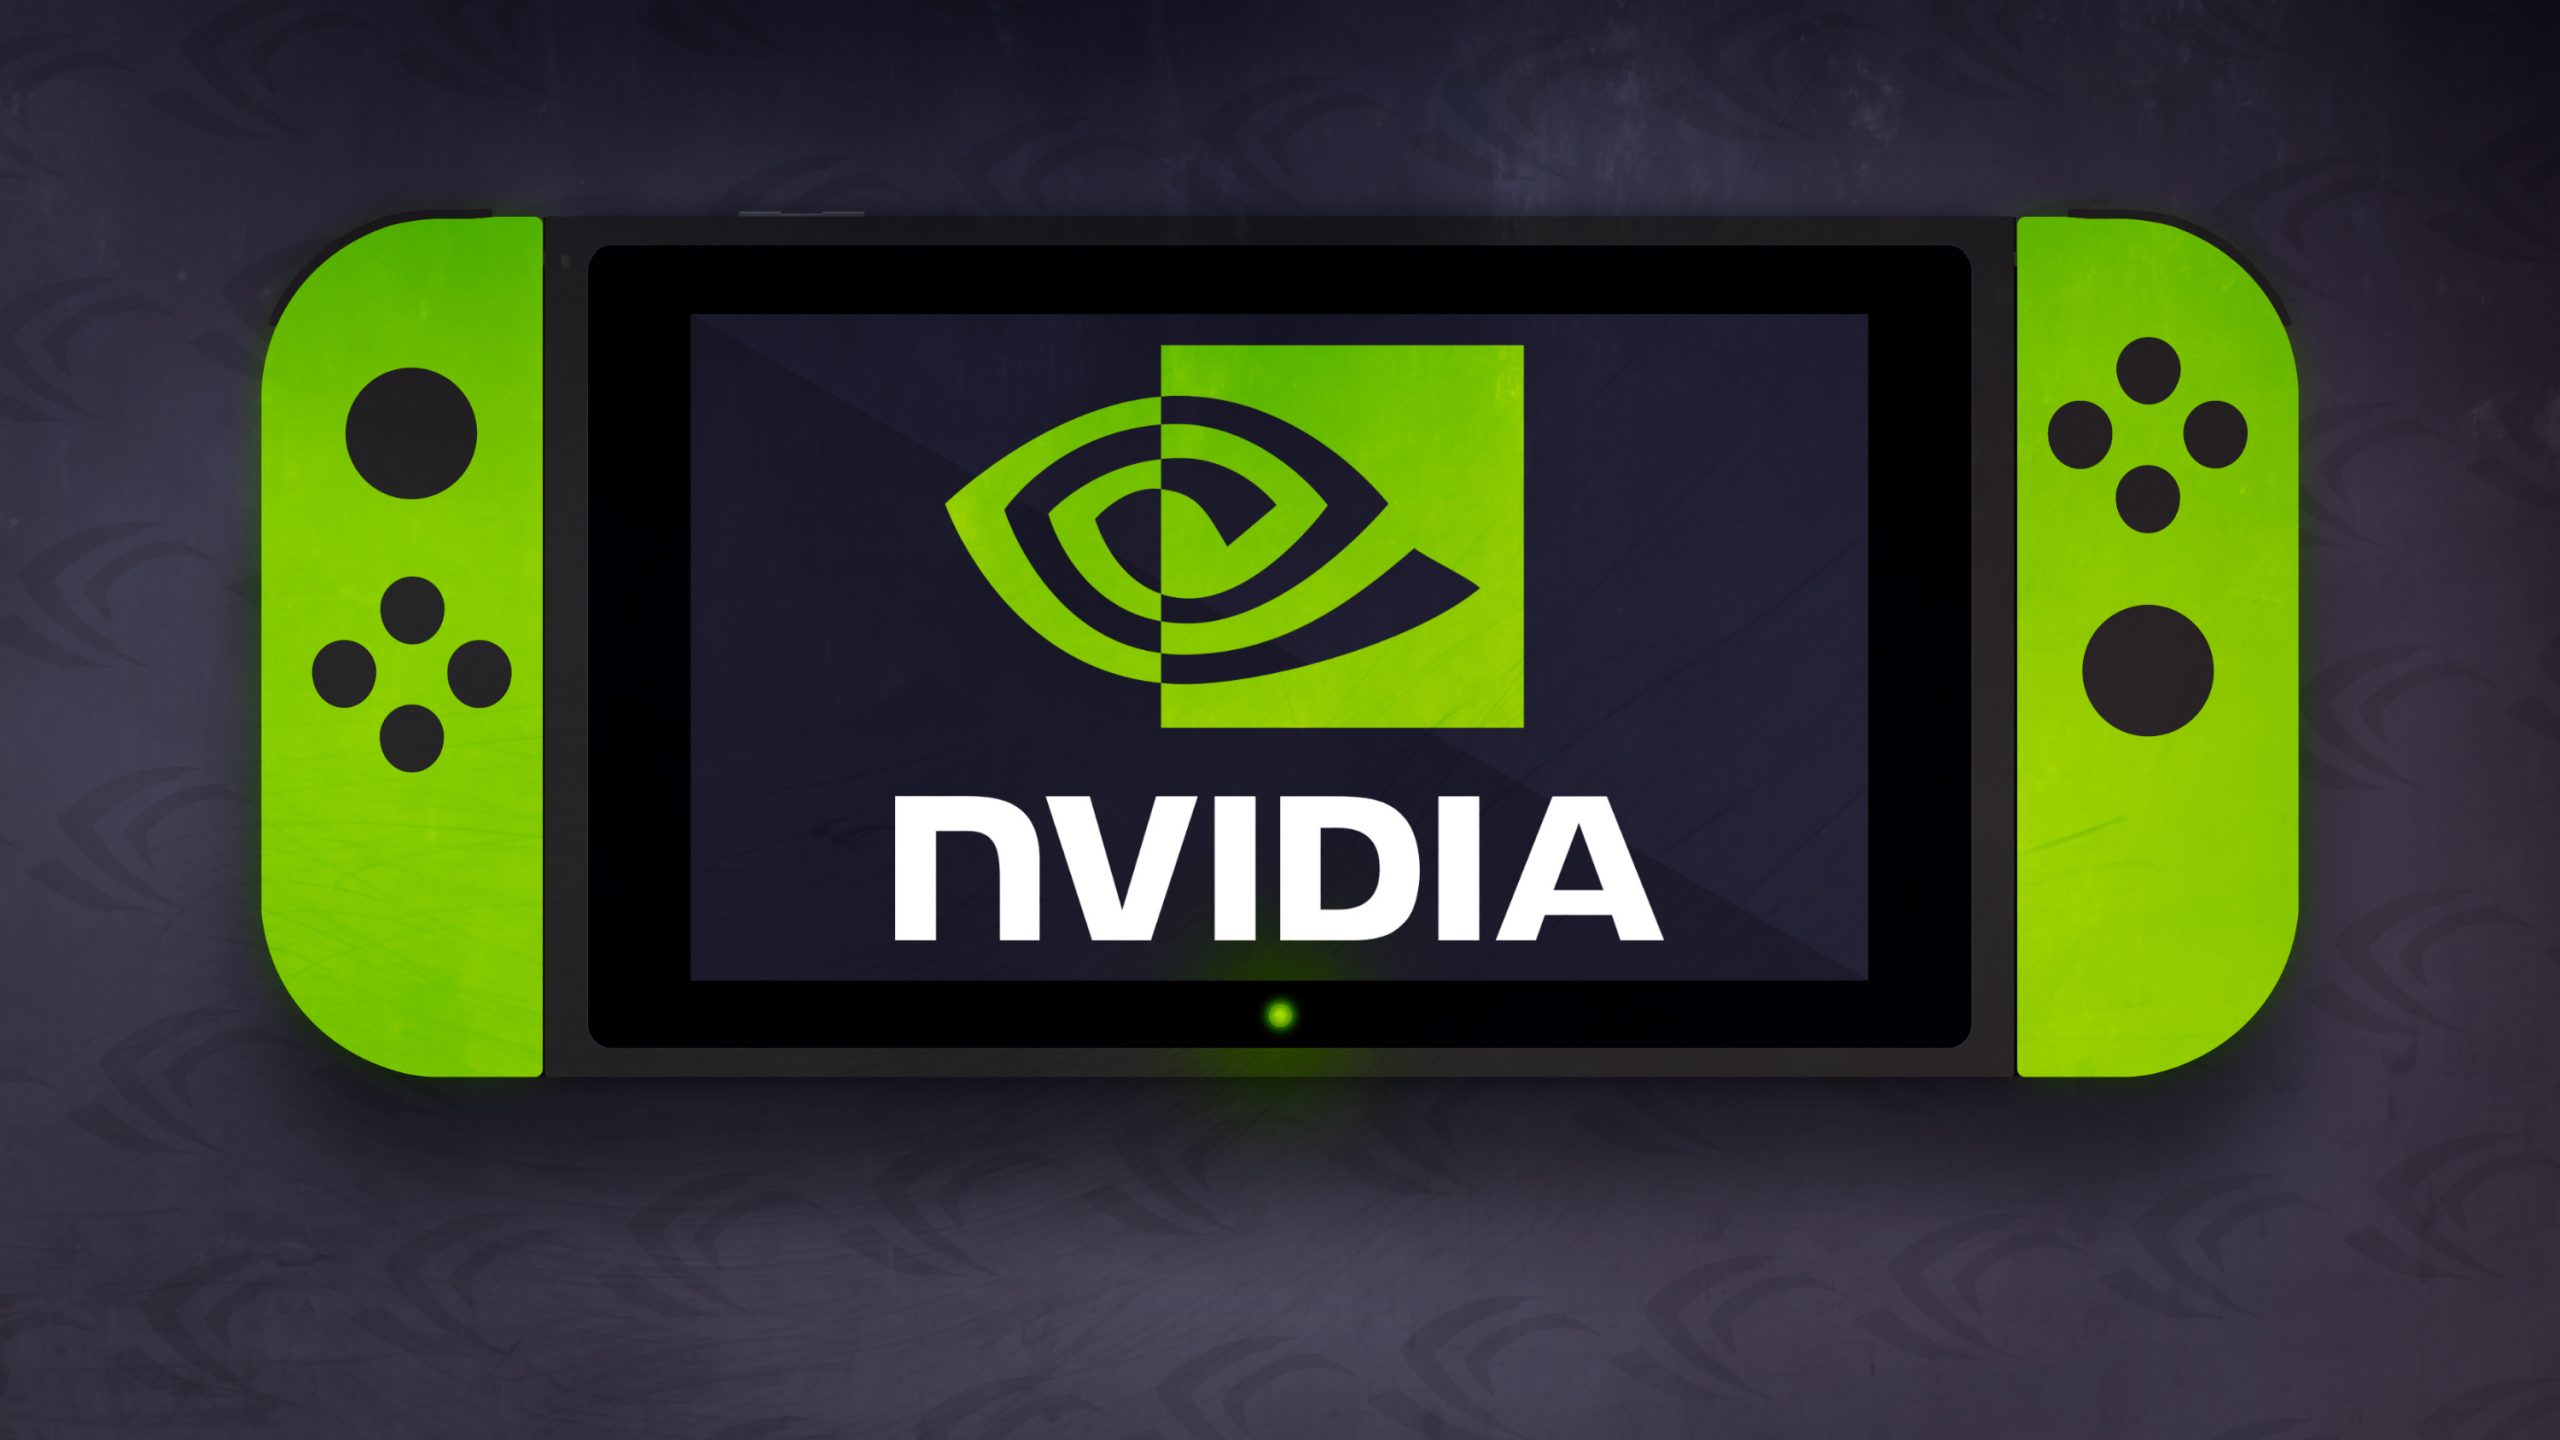 Nintendo Switch Nvidia Hiring for Console Tool